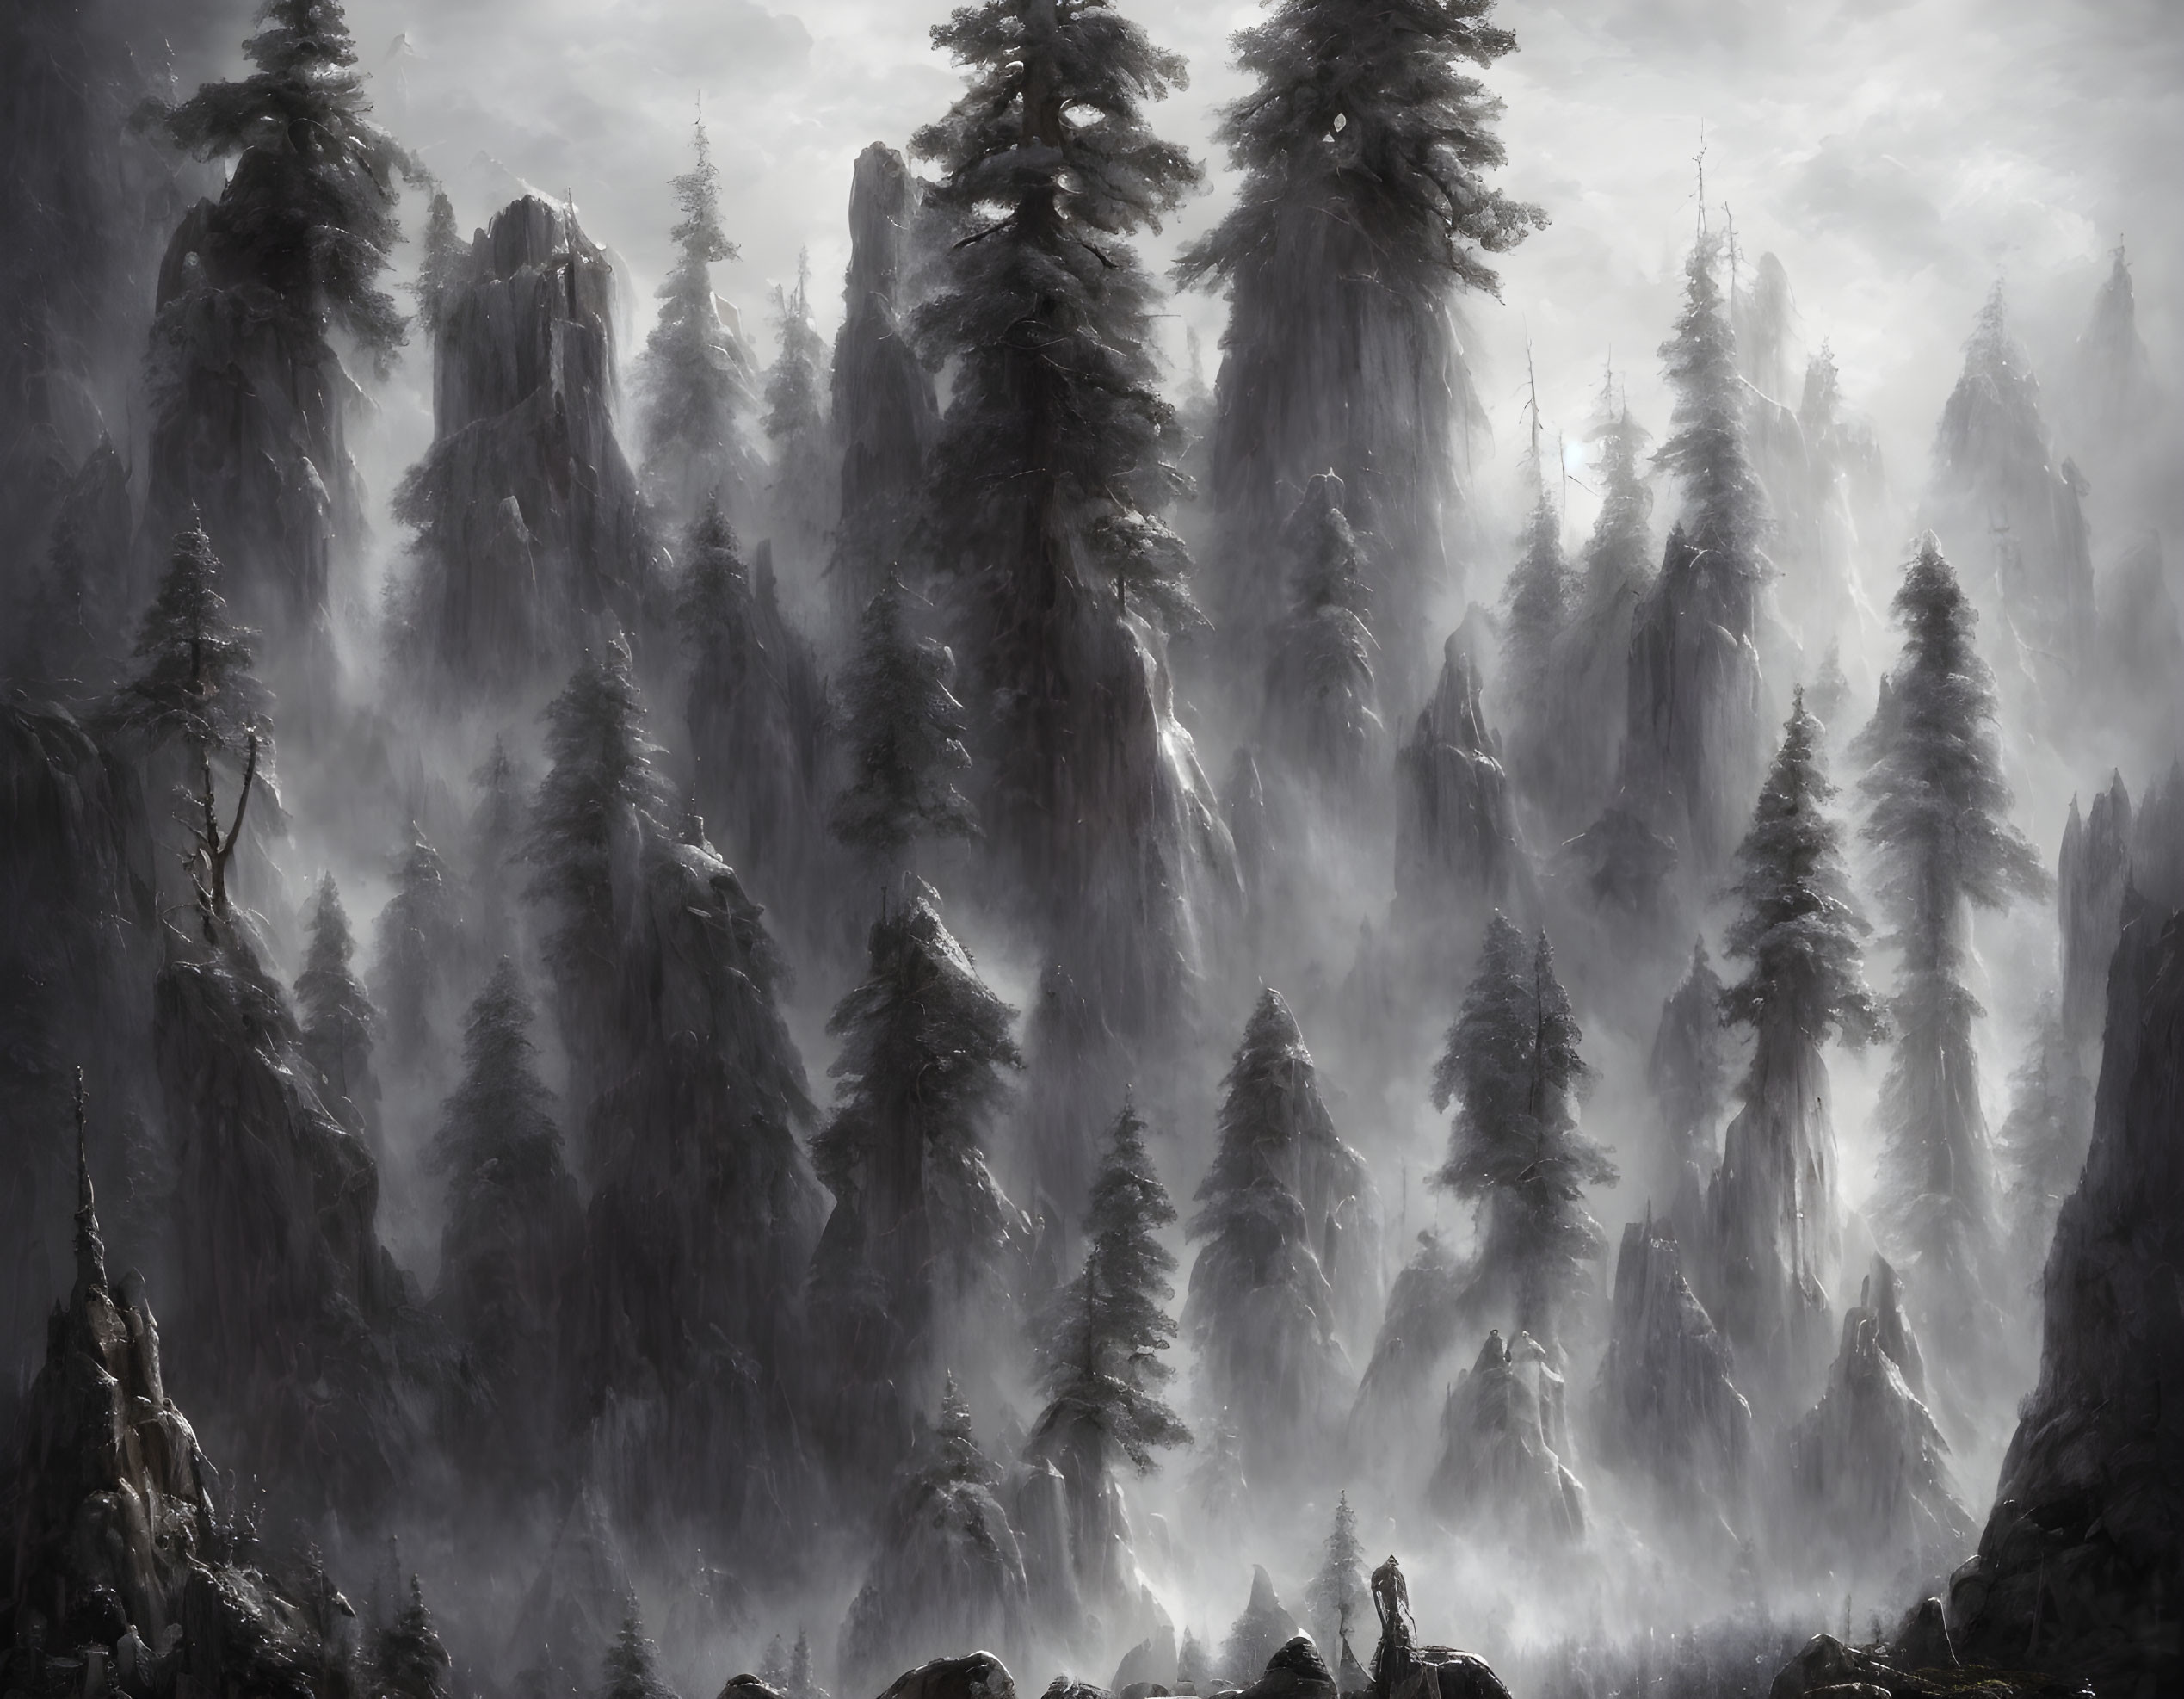 Monochrome forest with misty towering trees